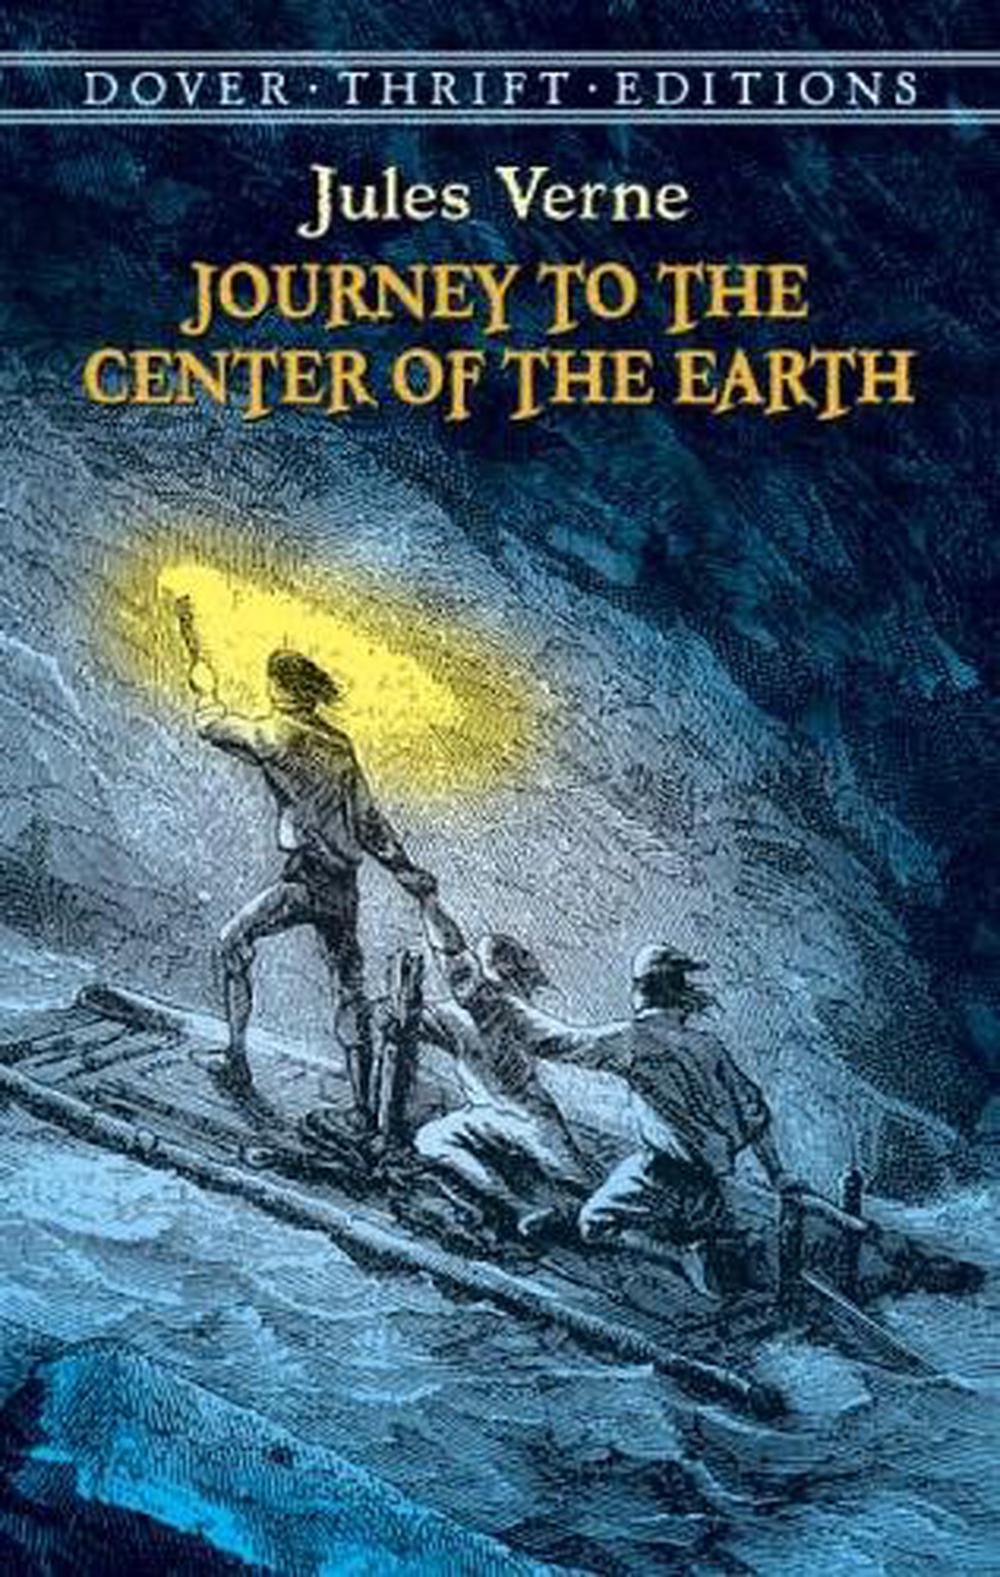 jules verne book journey to the center of the earth